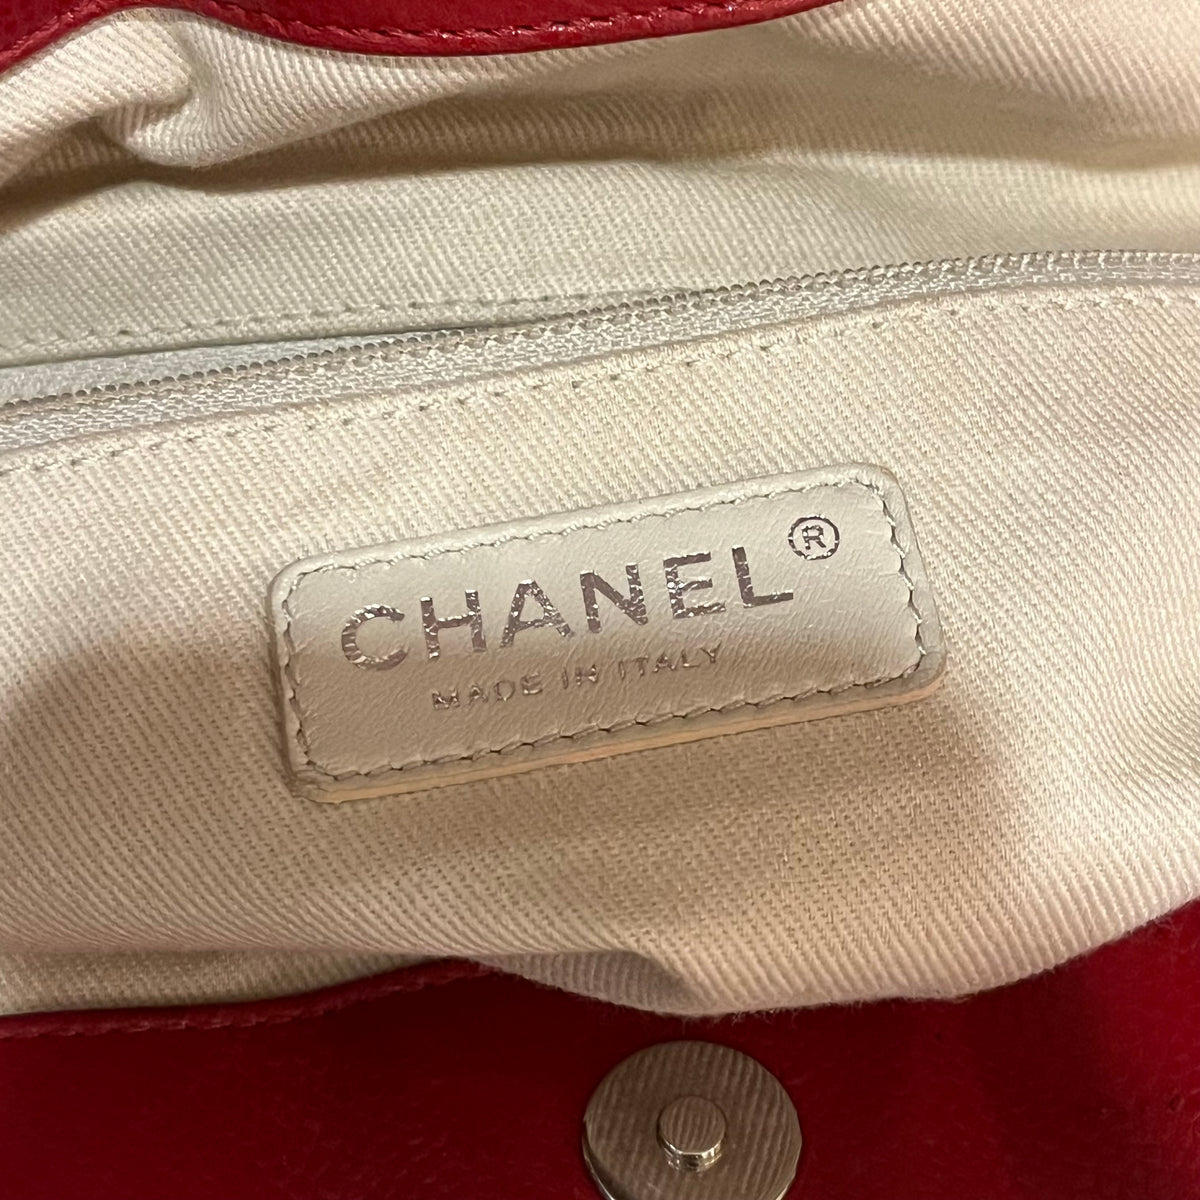 CHANEL Red Caviar Quilted Timeless CC Soft Tote TS3309